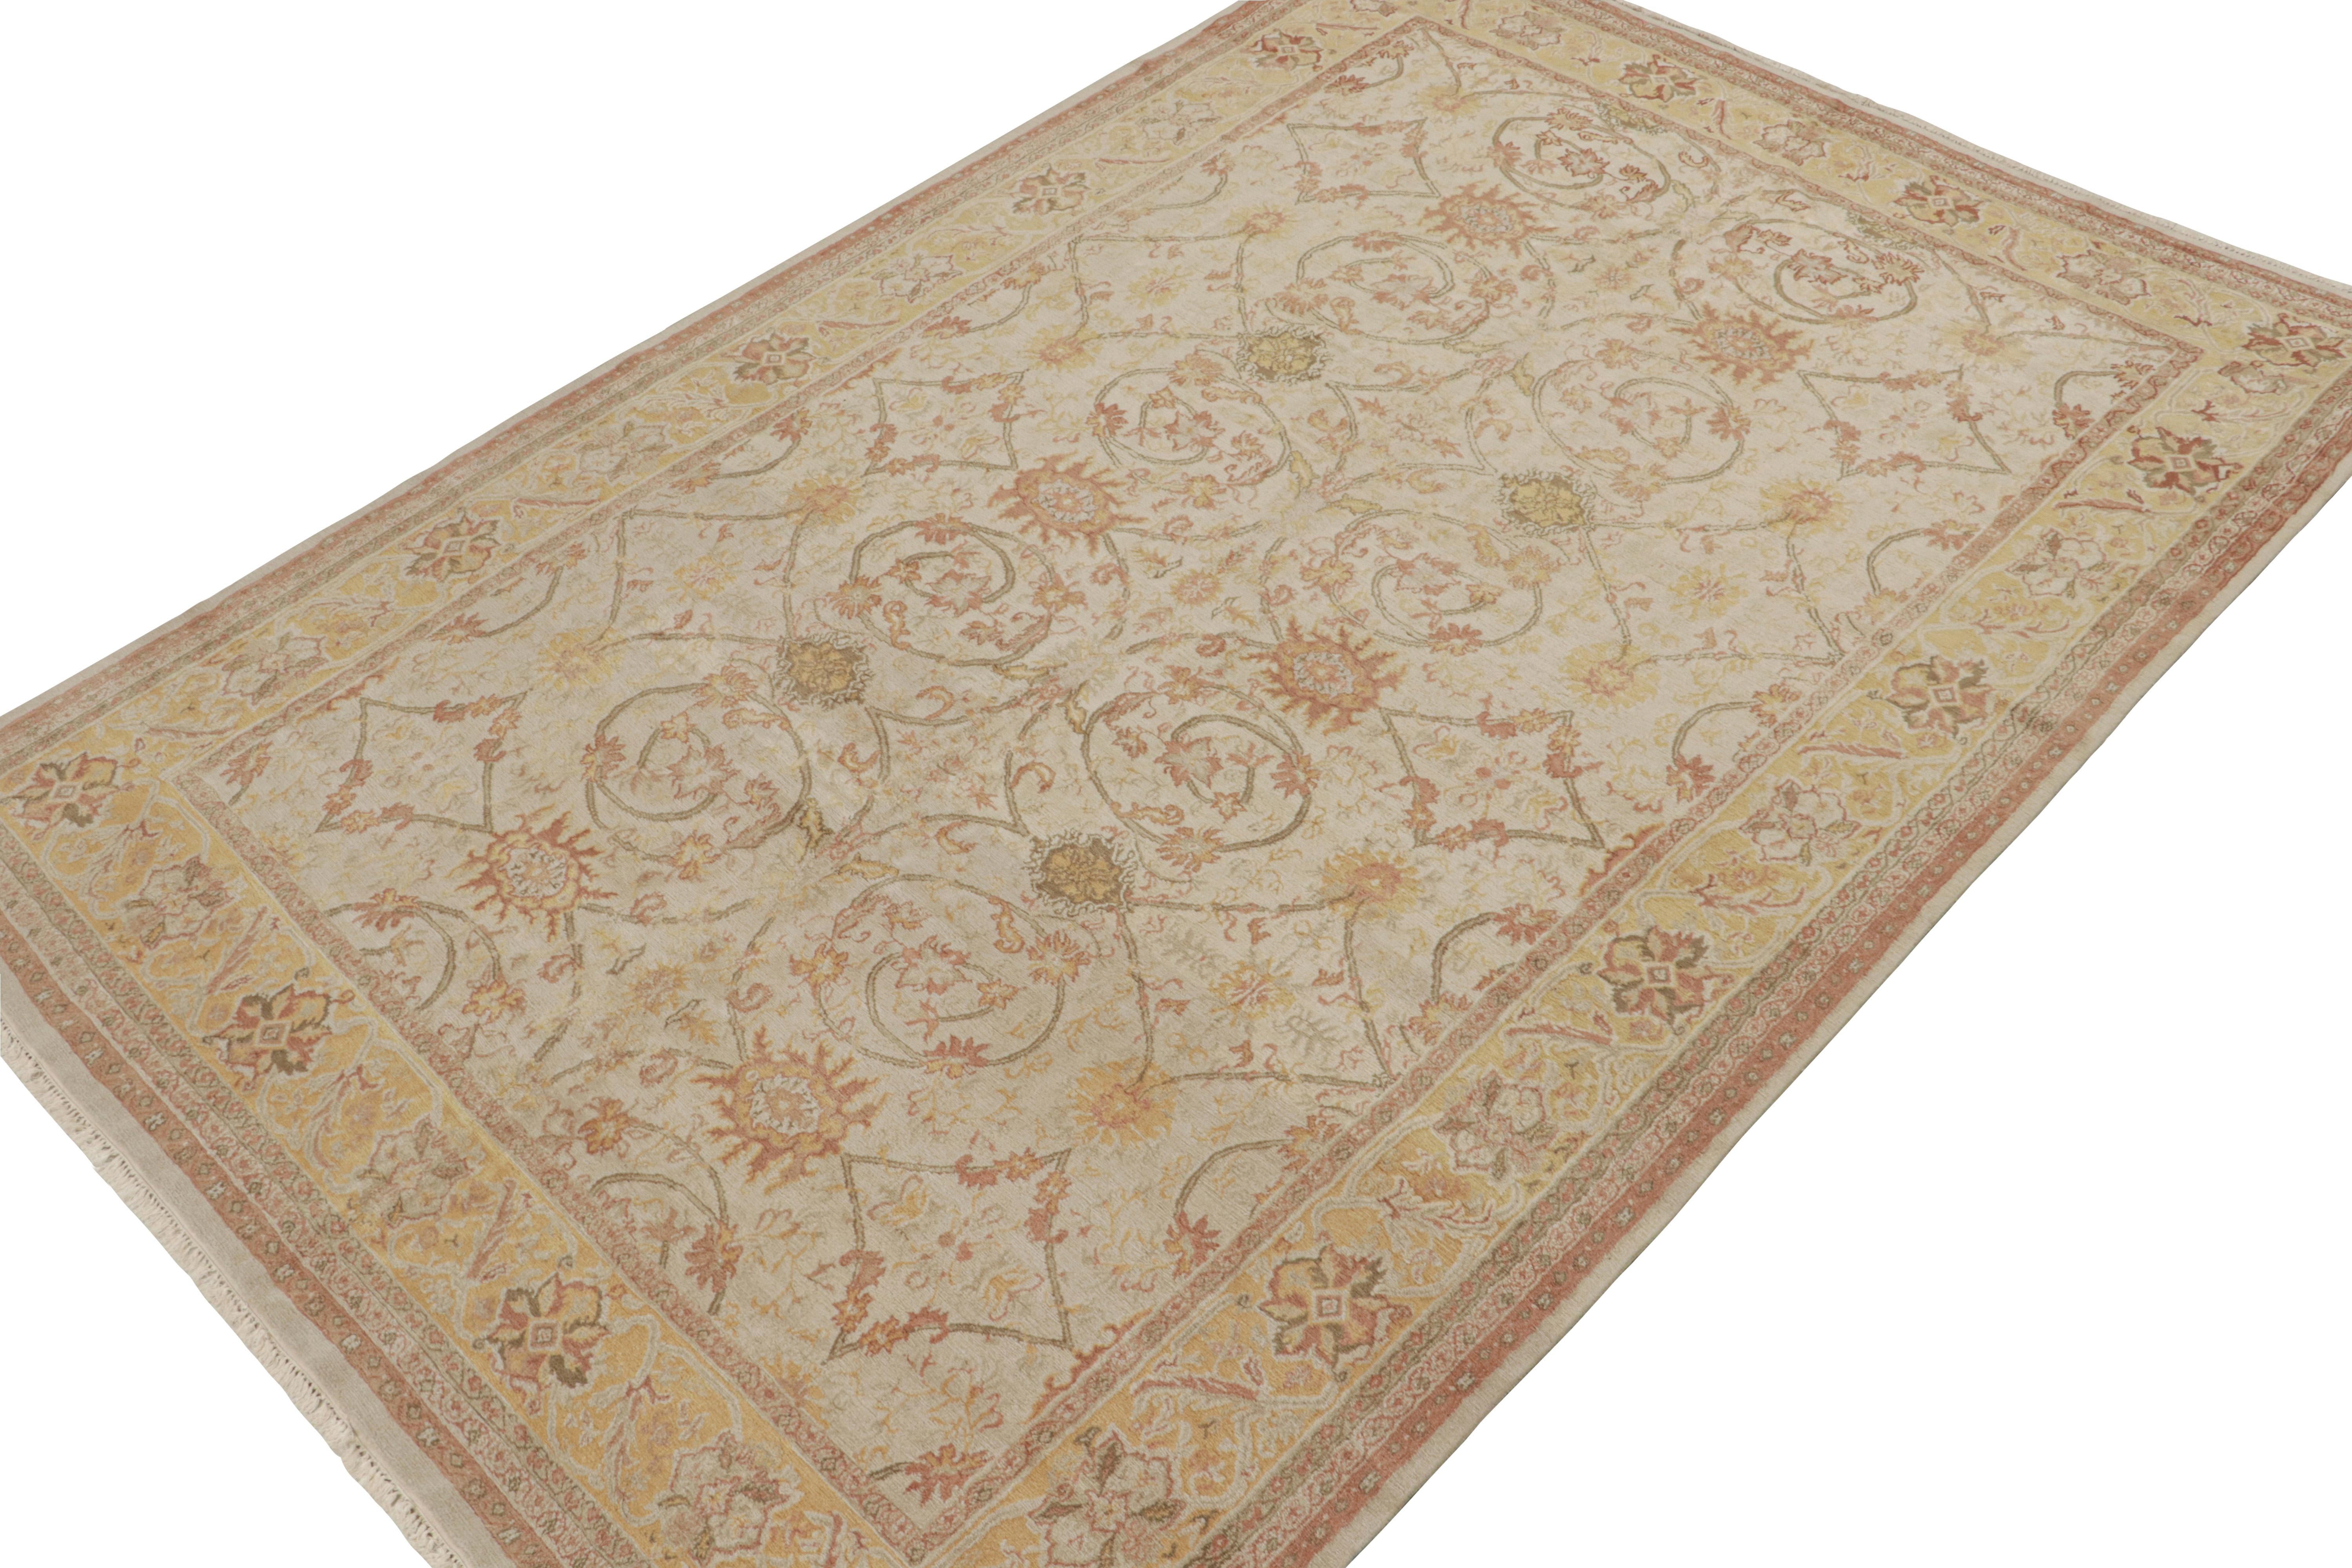 Nepalese Rug & Kilim’s Sultanabad style rug in Cream with Floral Patterns For Sale